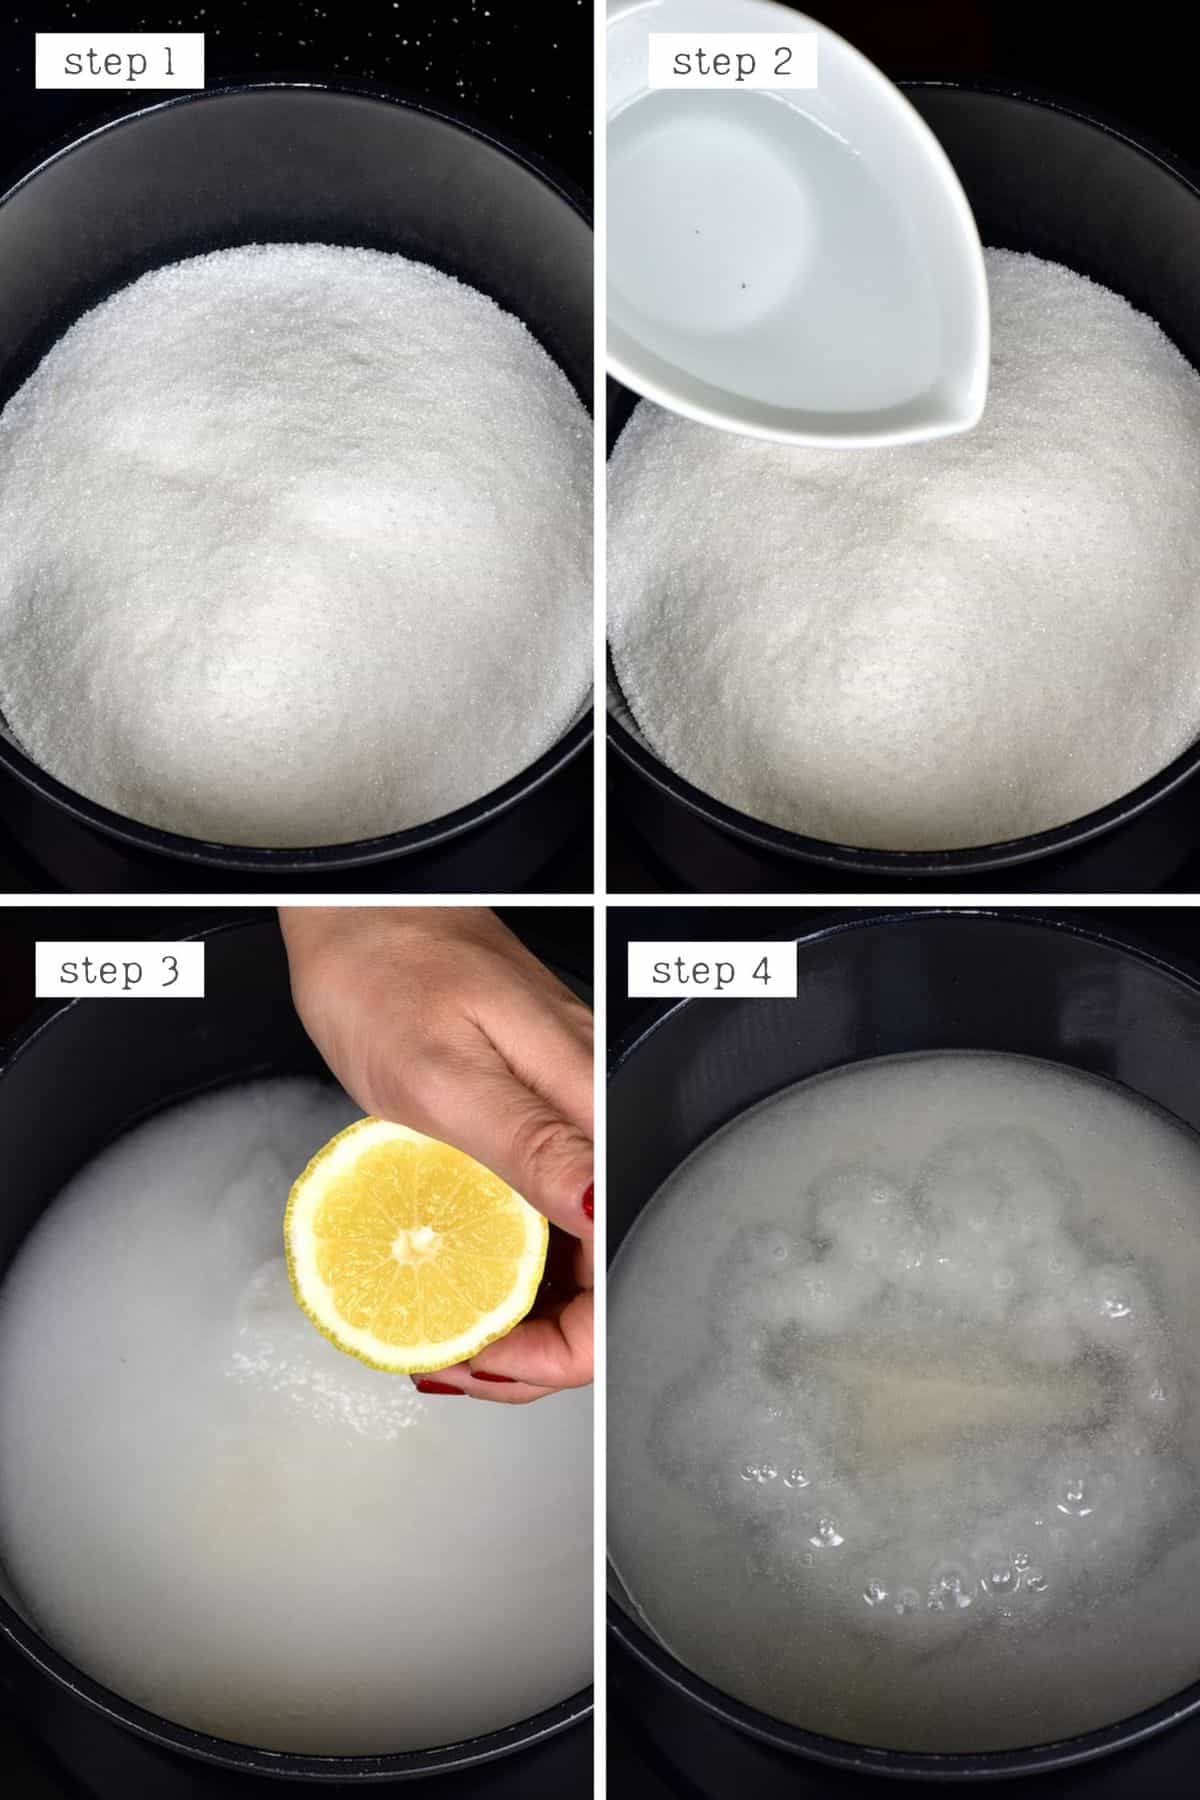 Steps for mixing sugar and water